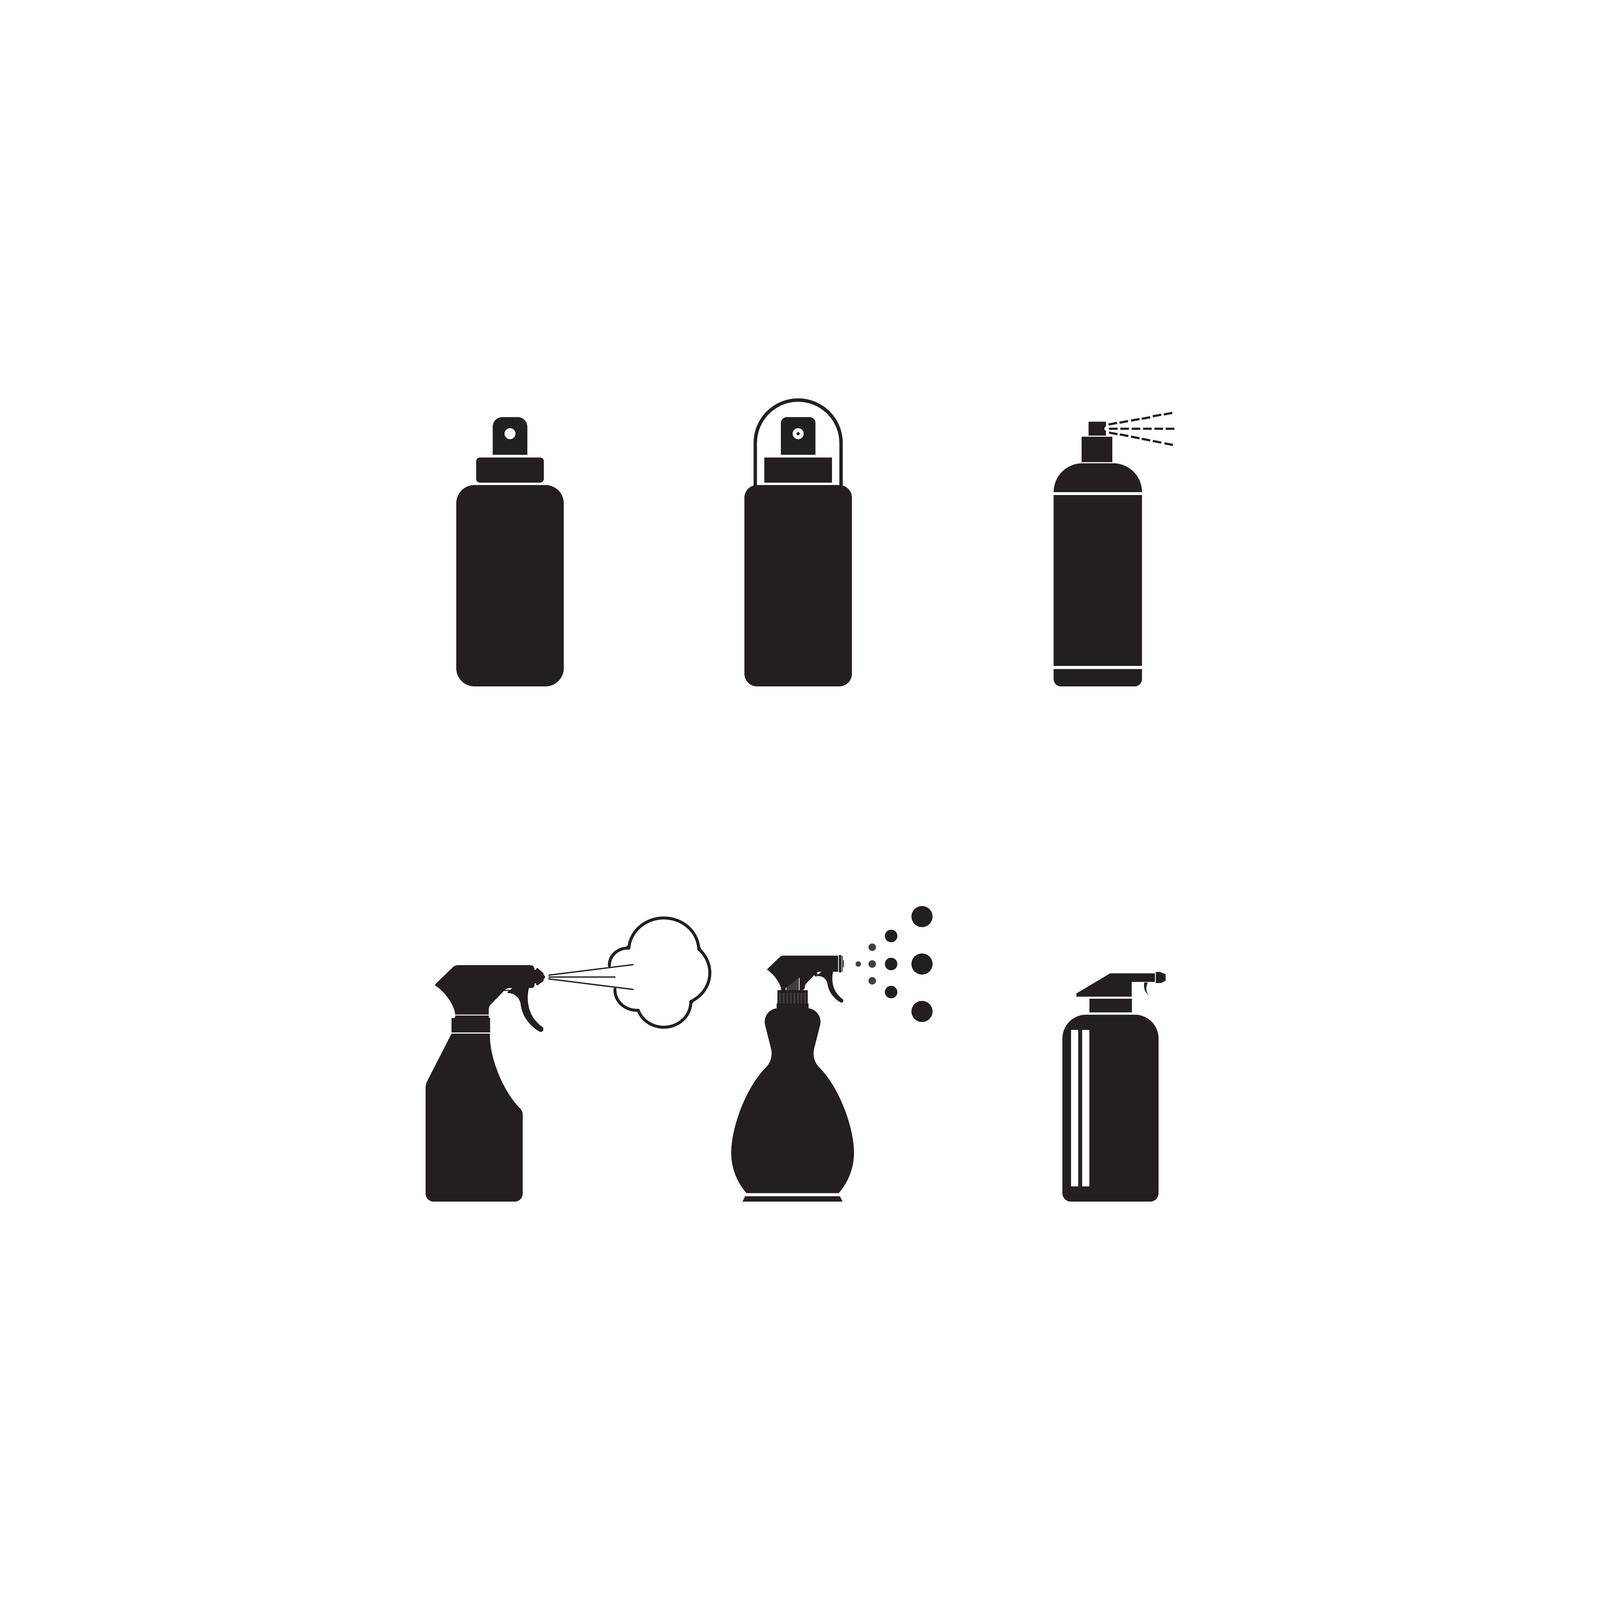 Spray Bottle icon by rnking